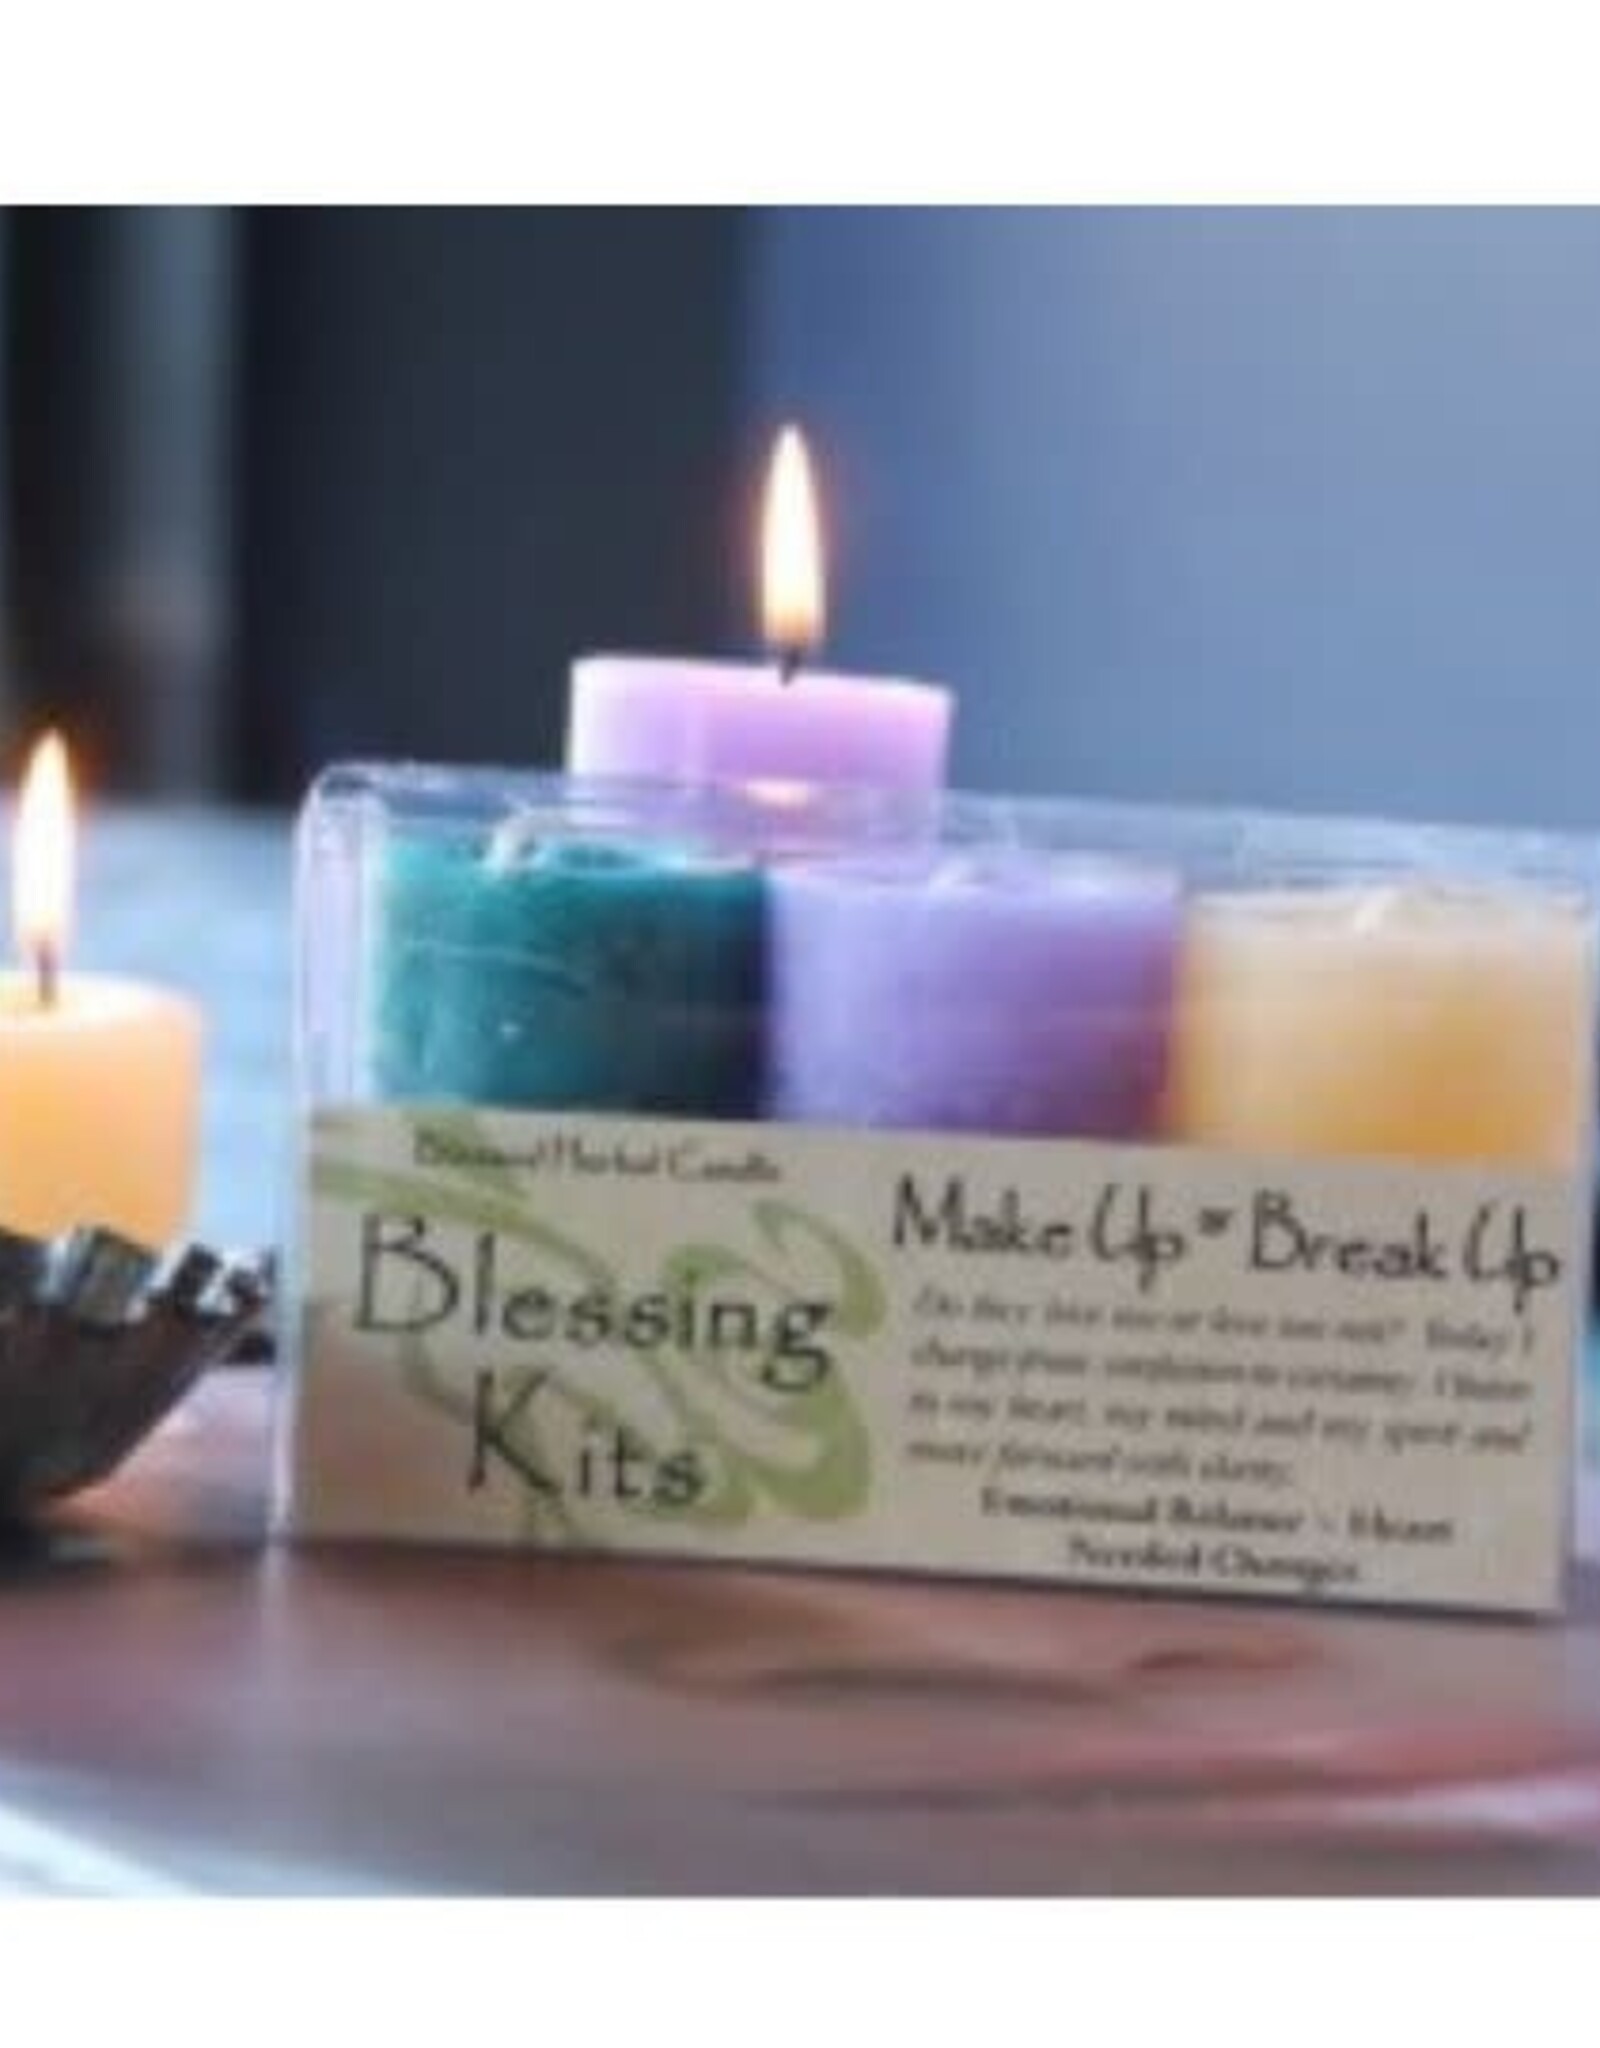 Coventry Creations Candle Blessing Kits - Make Up or Break Up